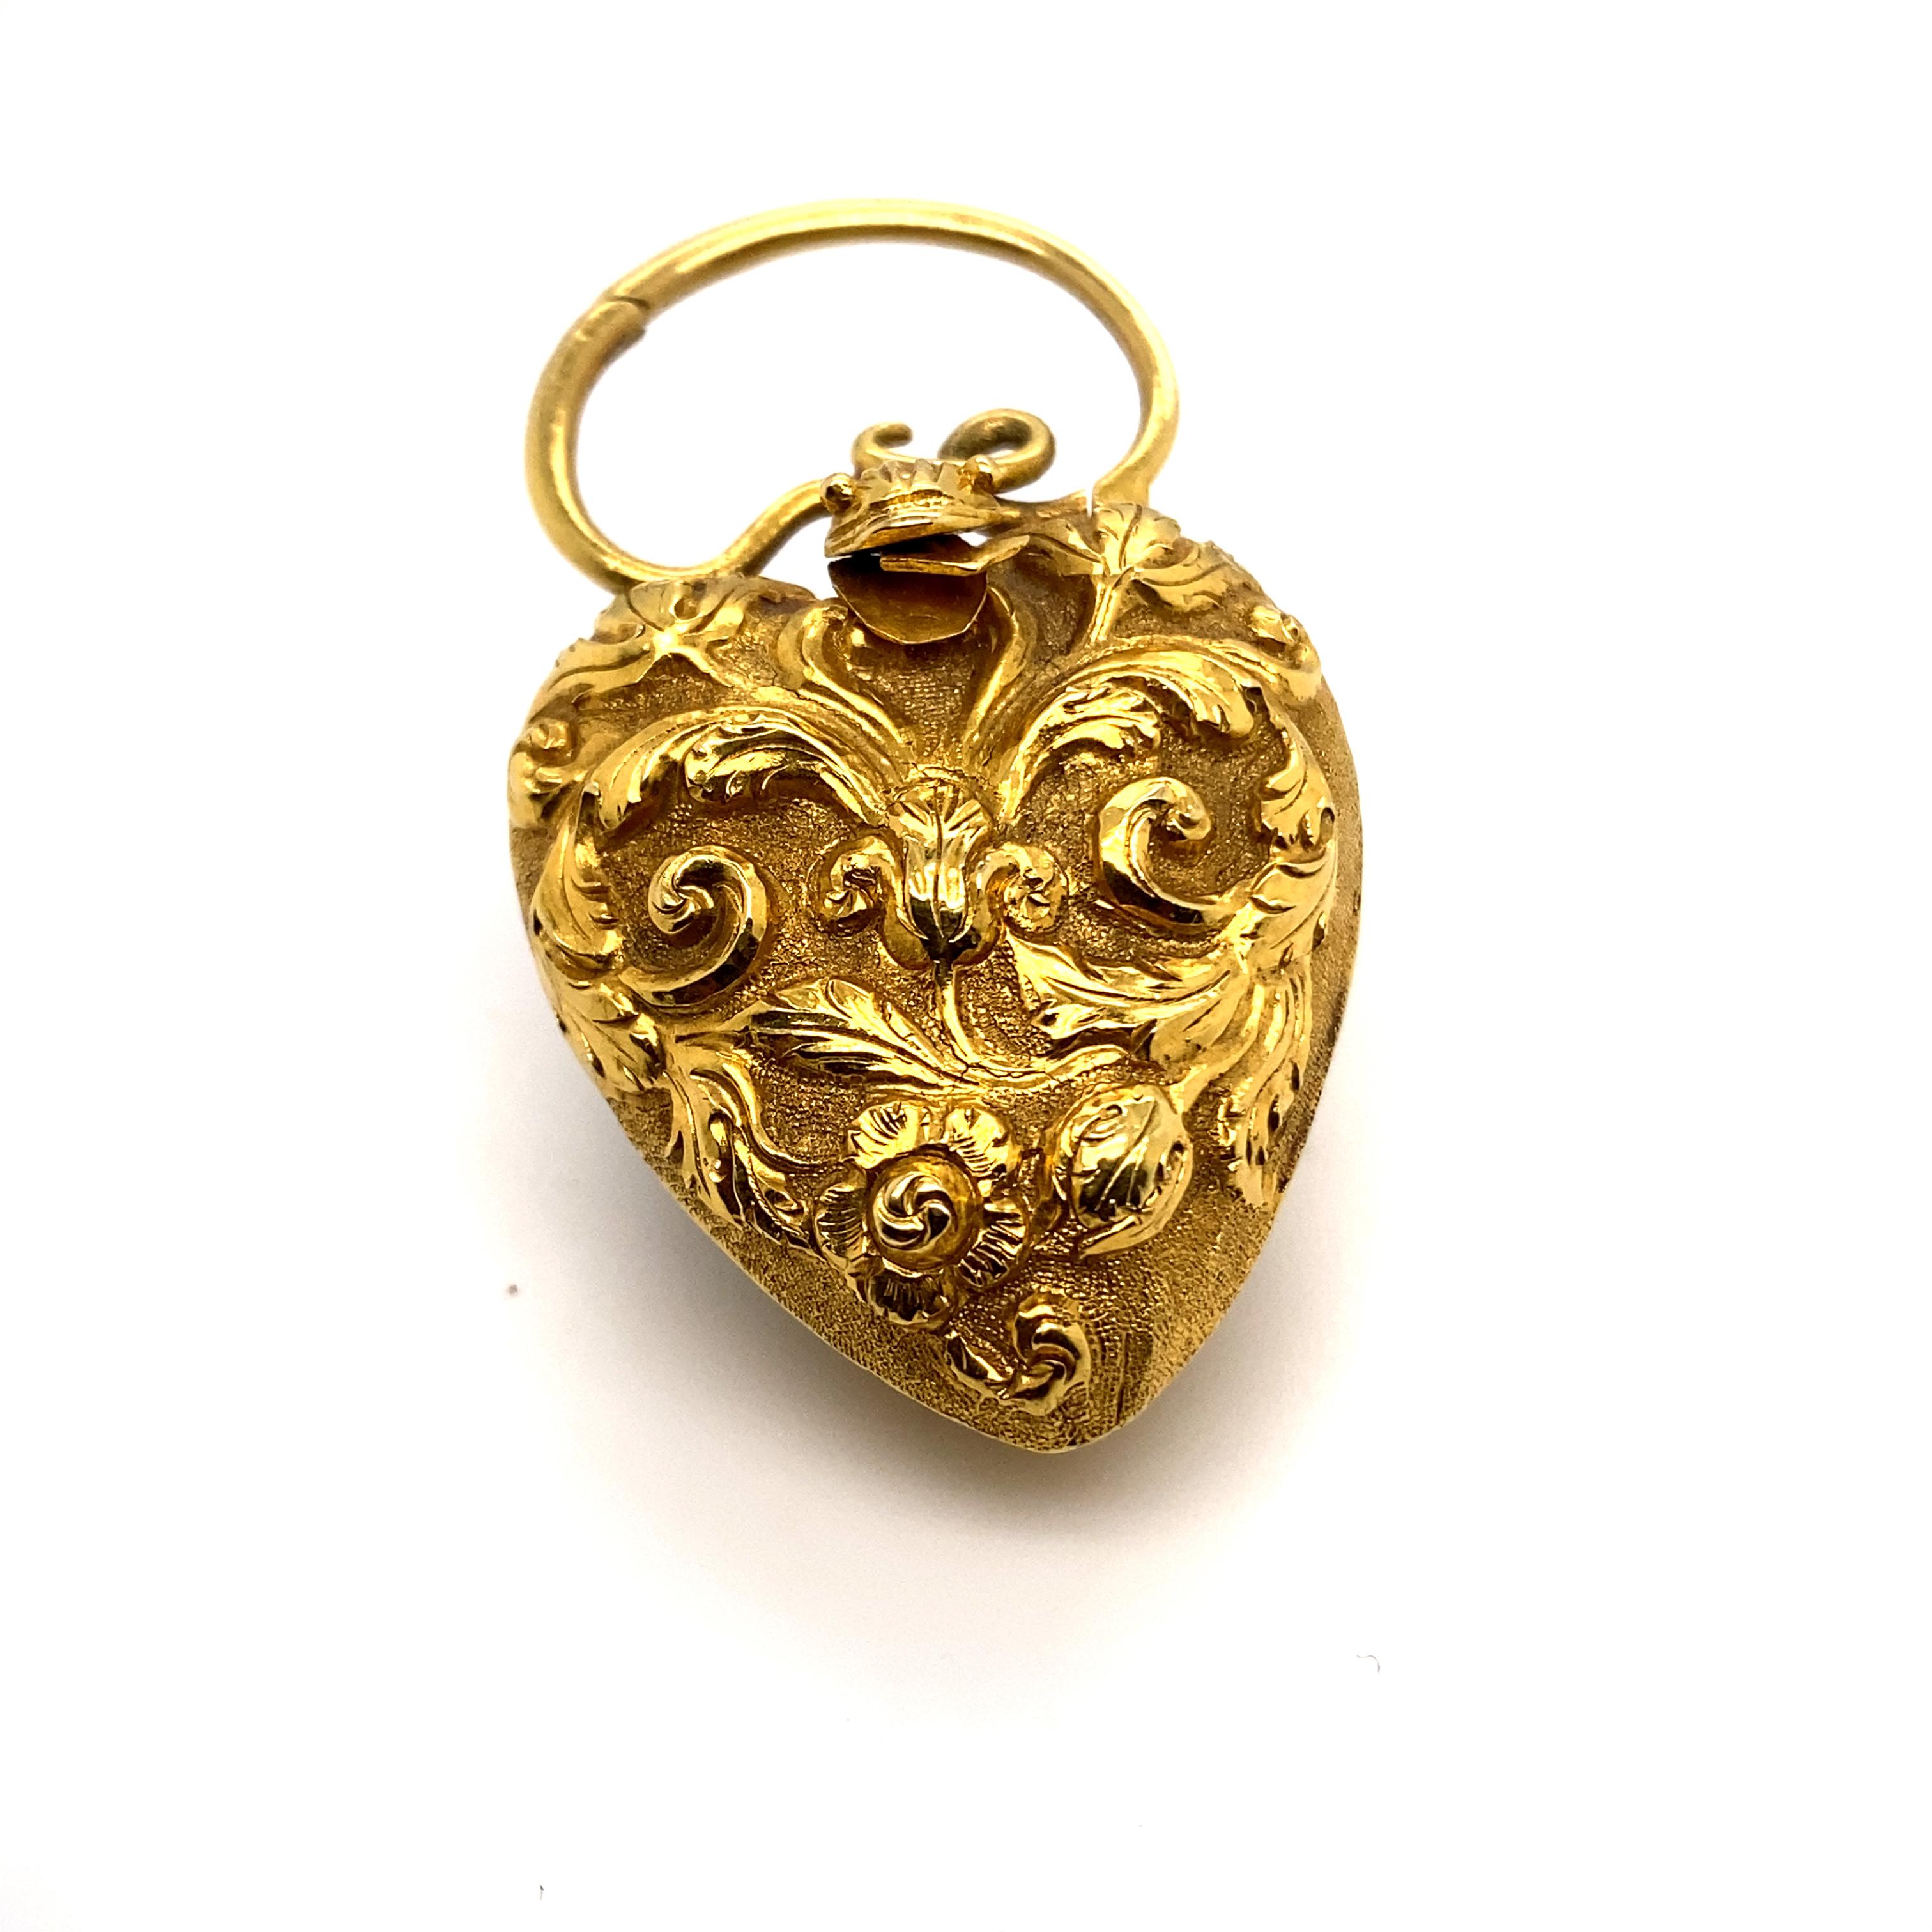 An exceptional Georgian gold heart shaped locket pendant with snake motif and chain, featuring a repoussé foliate design heart locket hinged to memorial glass frame inside, surmounted by an entwined snake and a hinged clasp pendant tail

The glazed